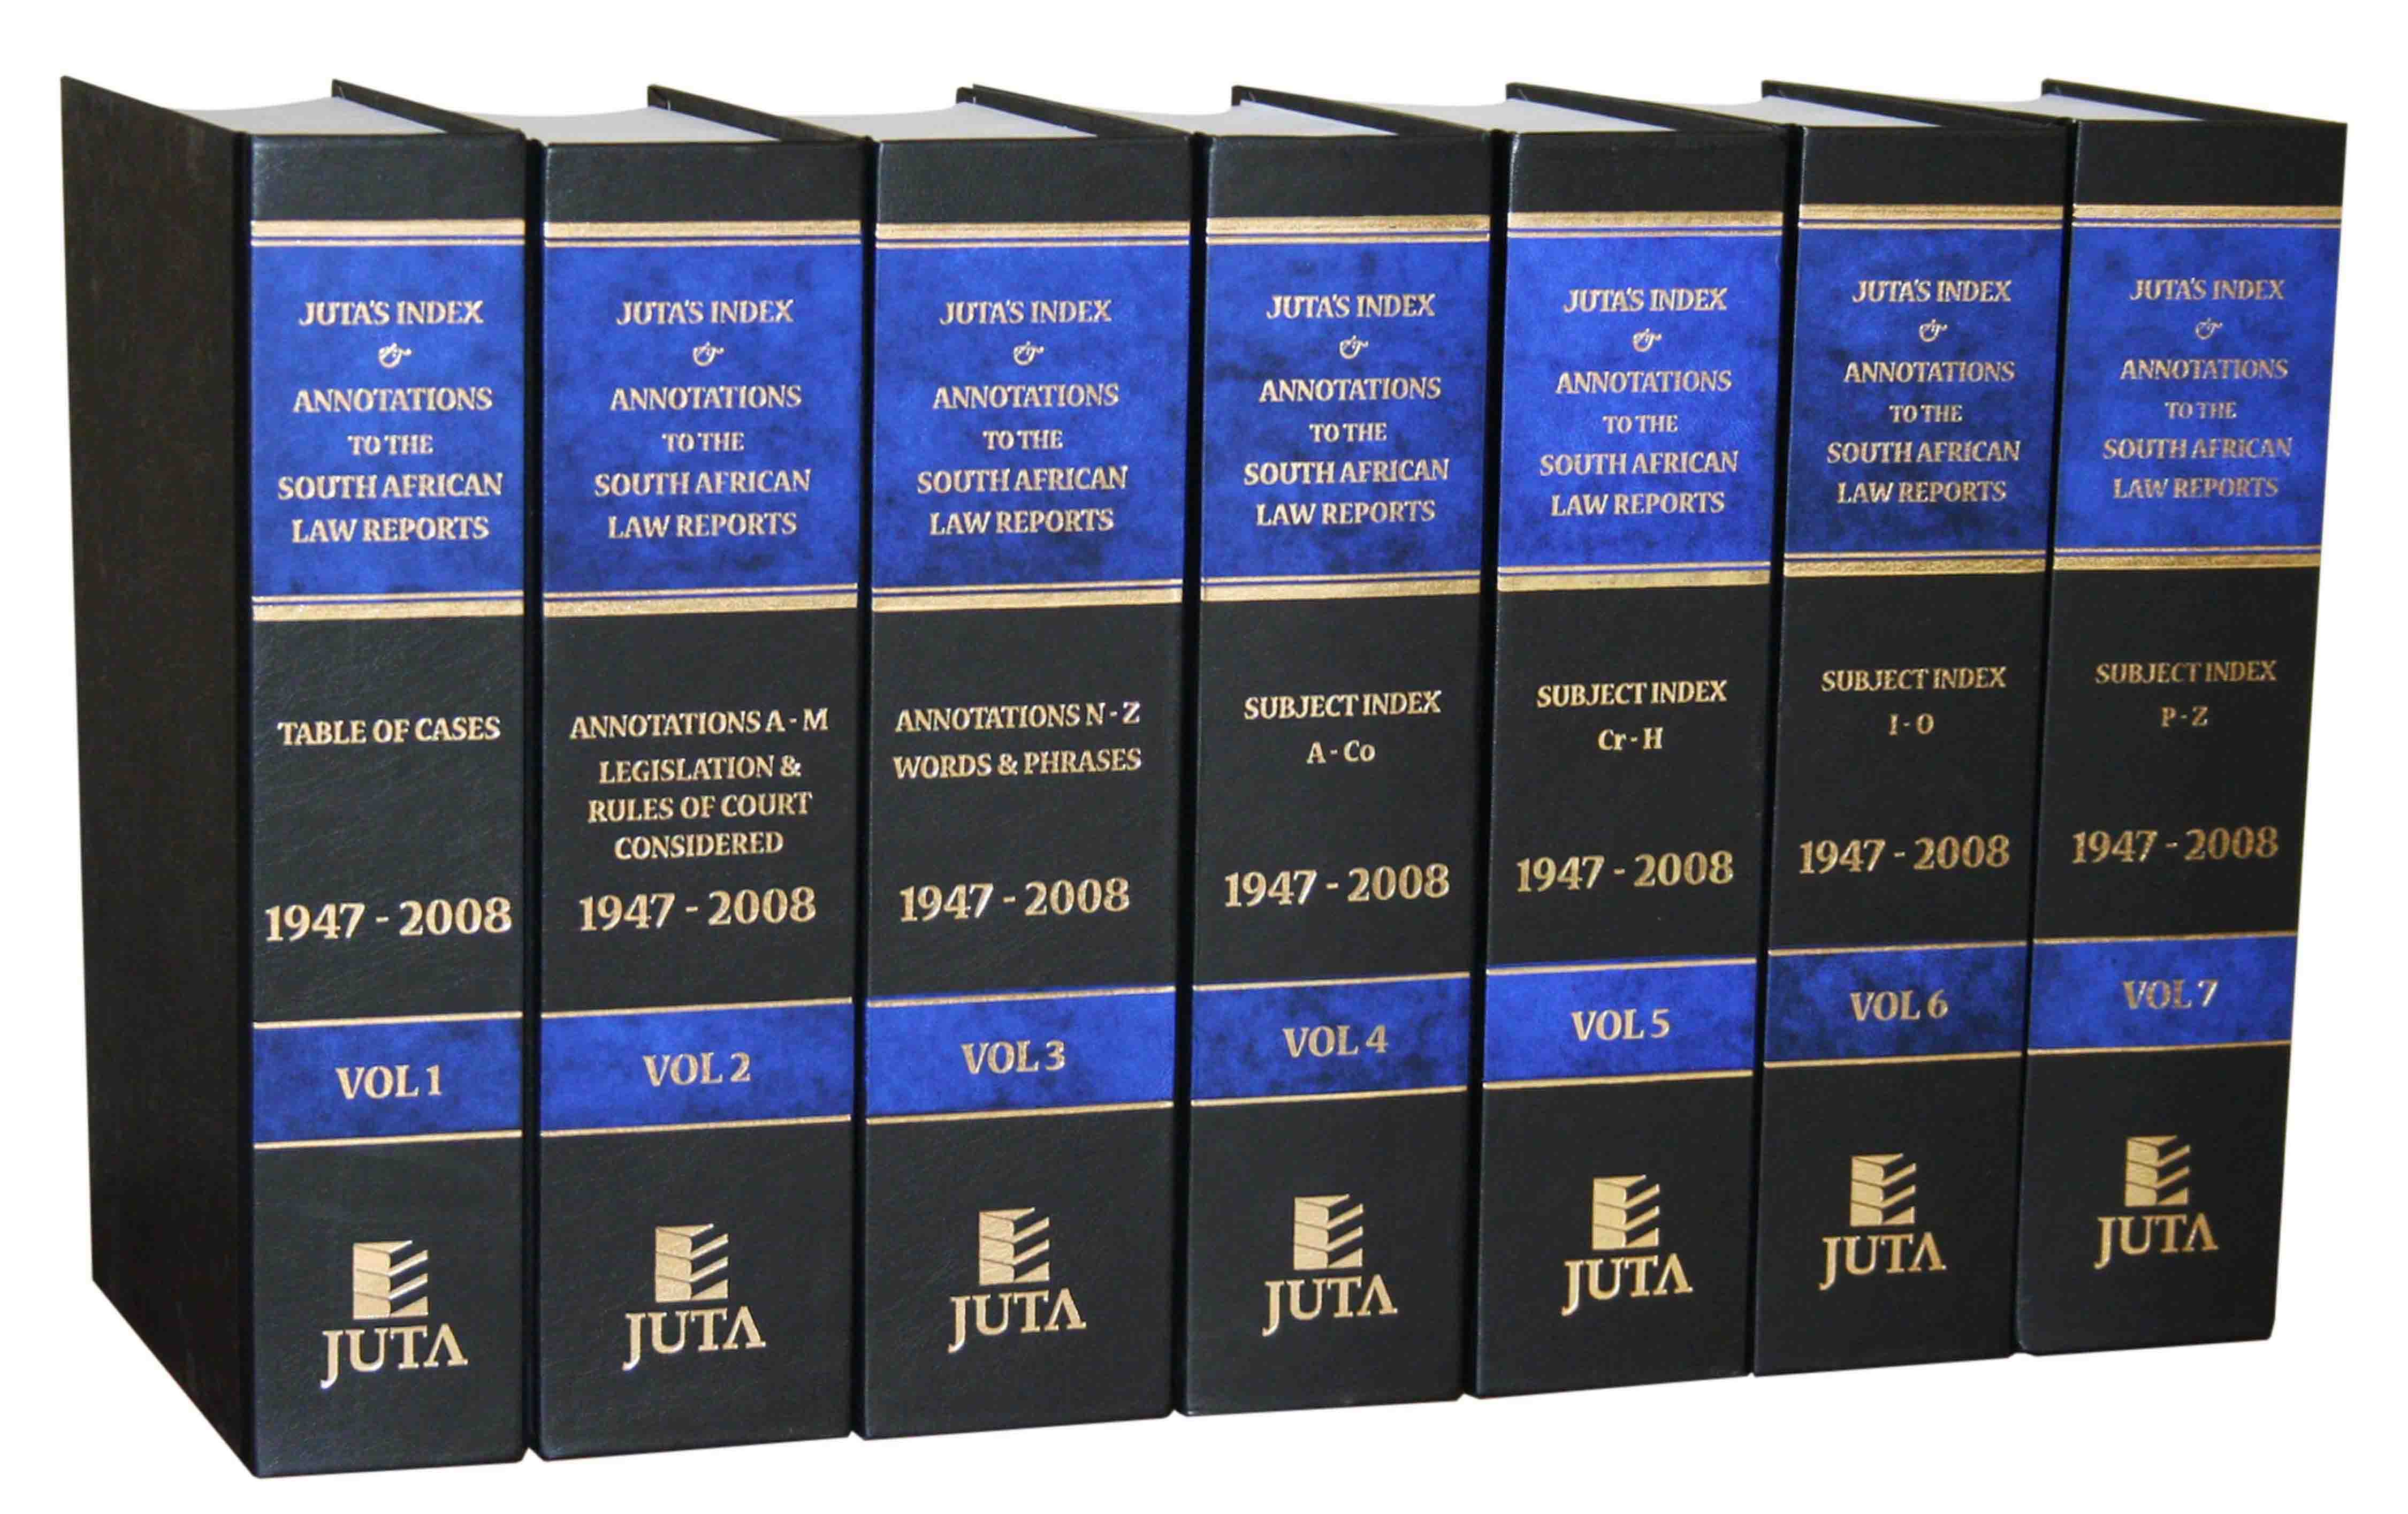 Index and Annotations to the South African Law Reports, Juta's (1947-2008)